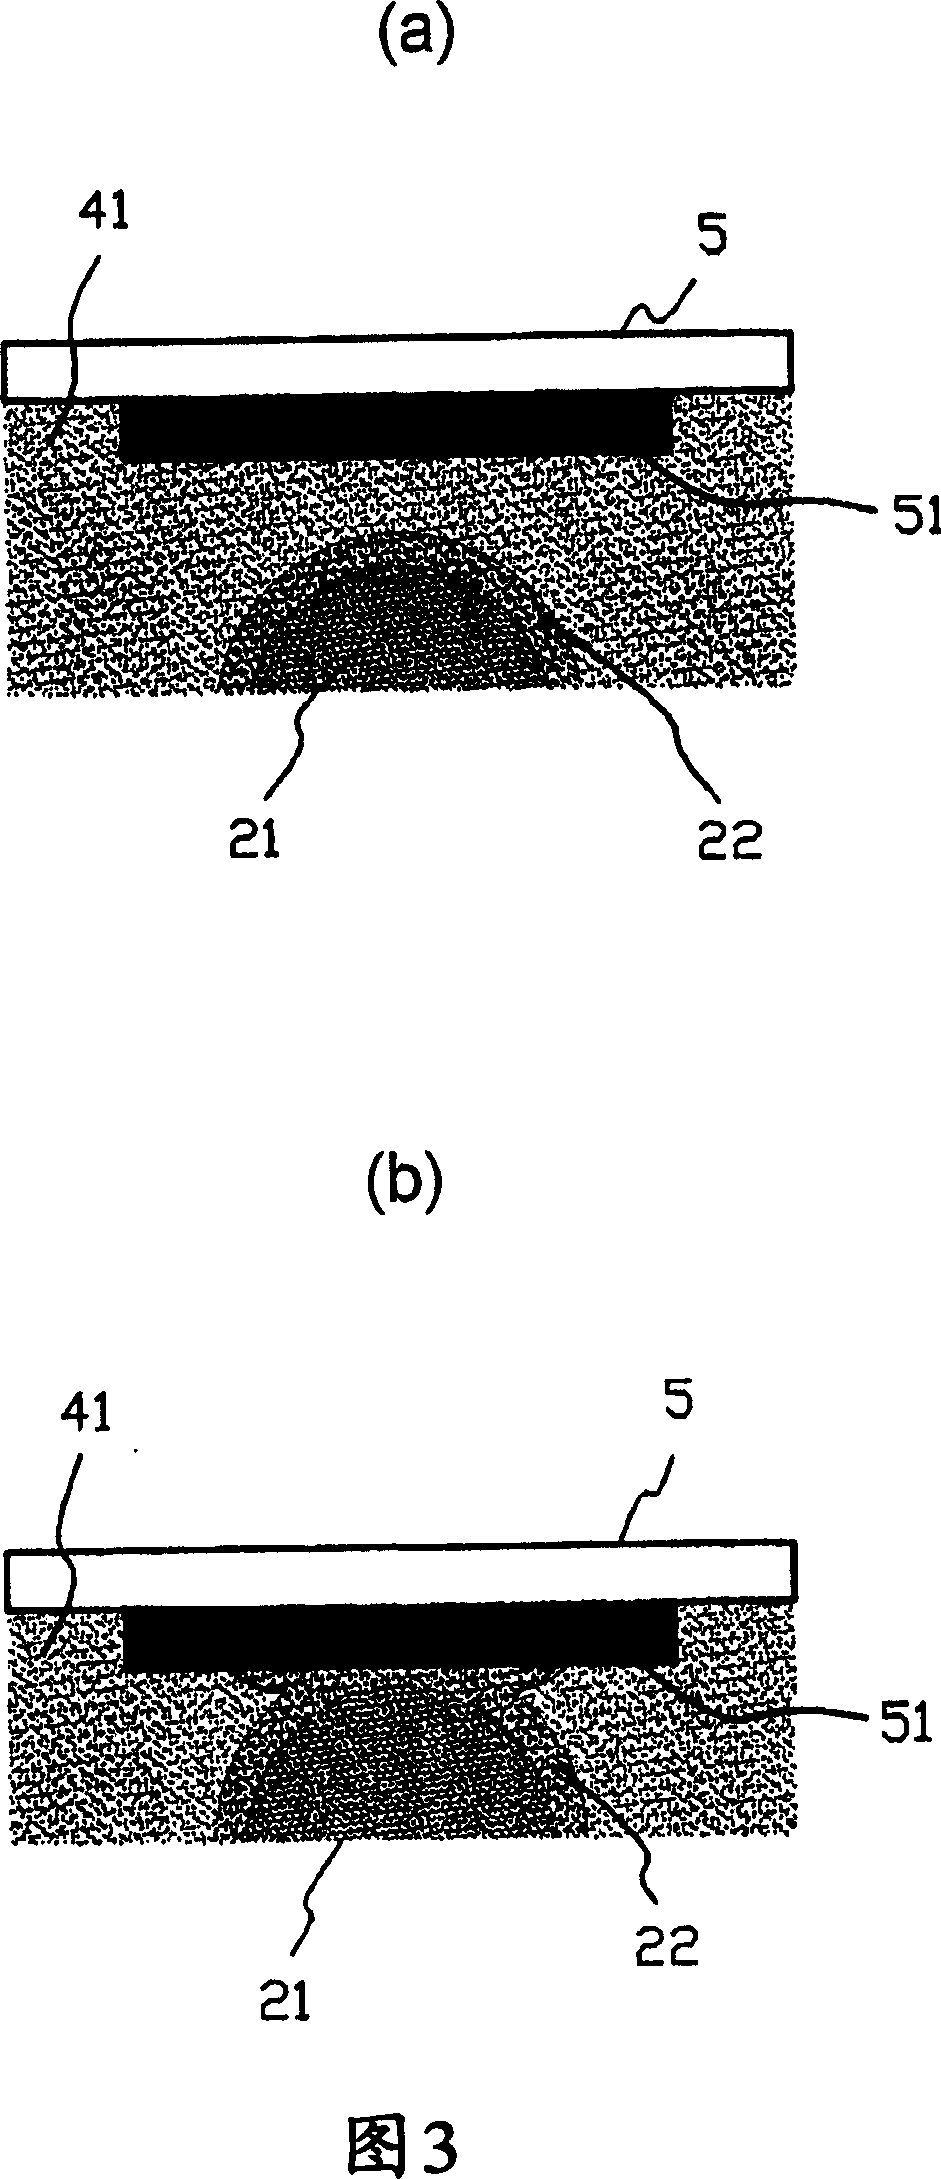 Insulated conductive particles and anisotropic conductive adhesive film containing the particles